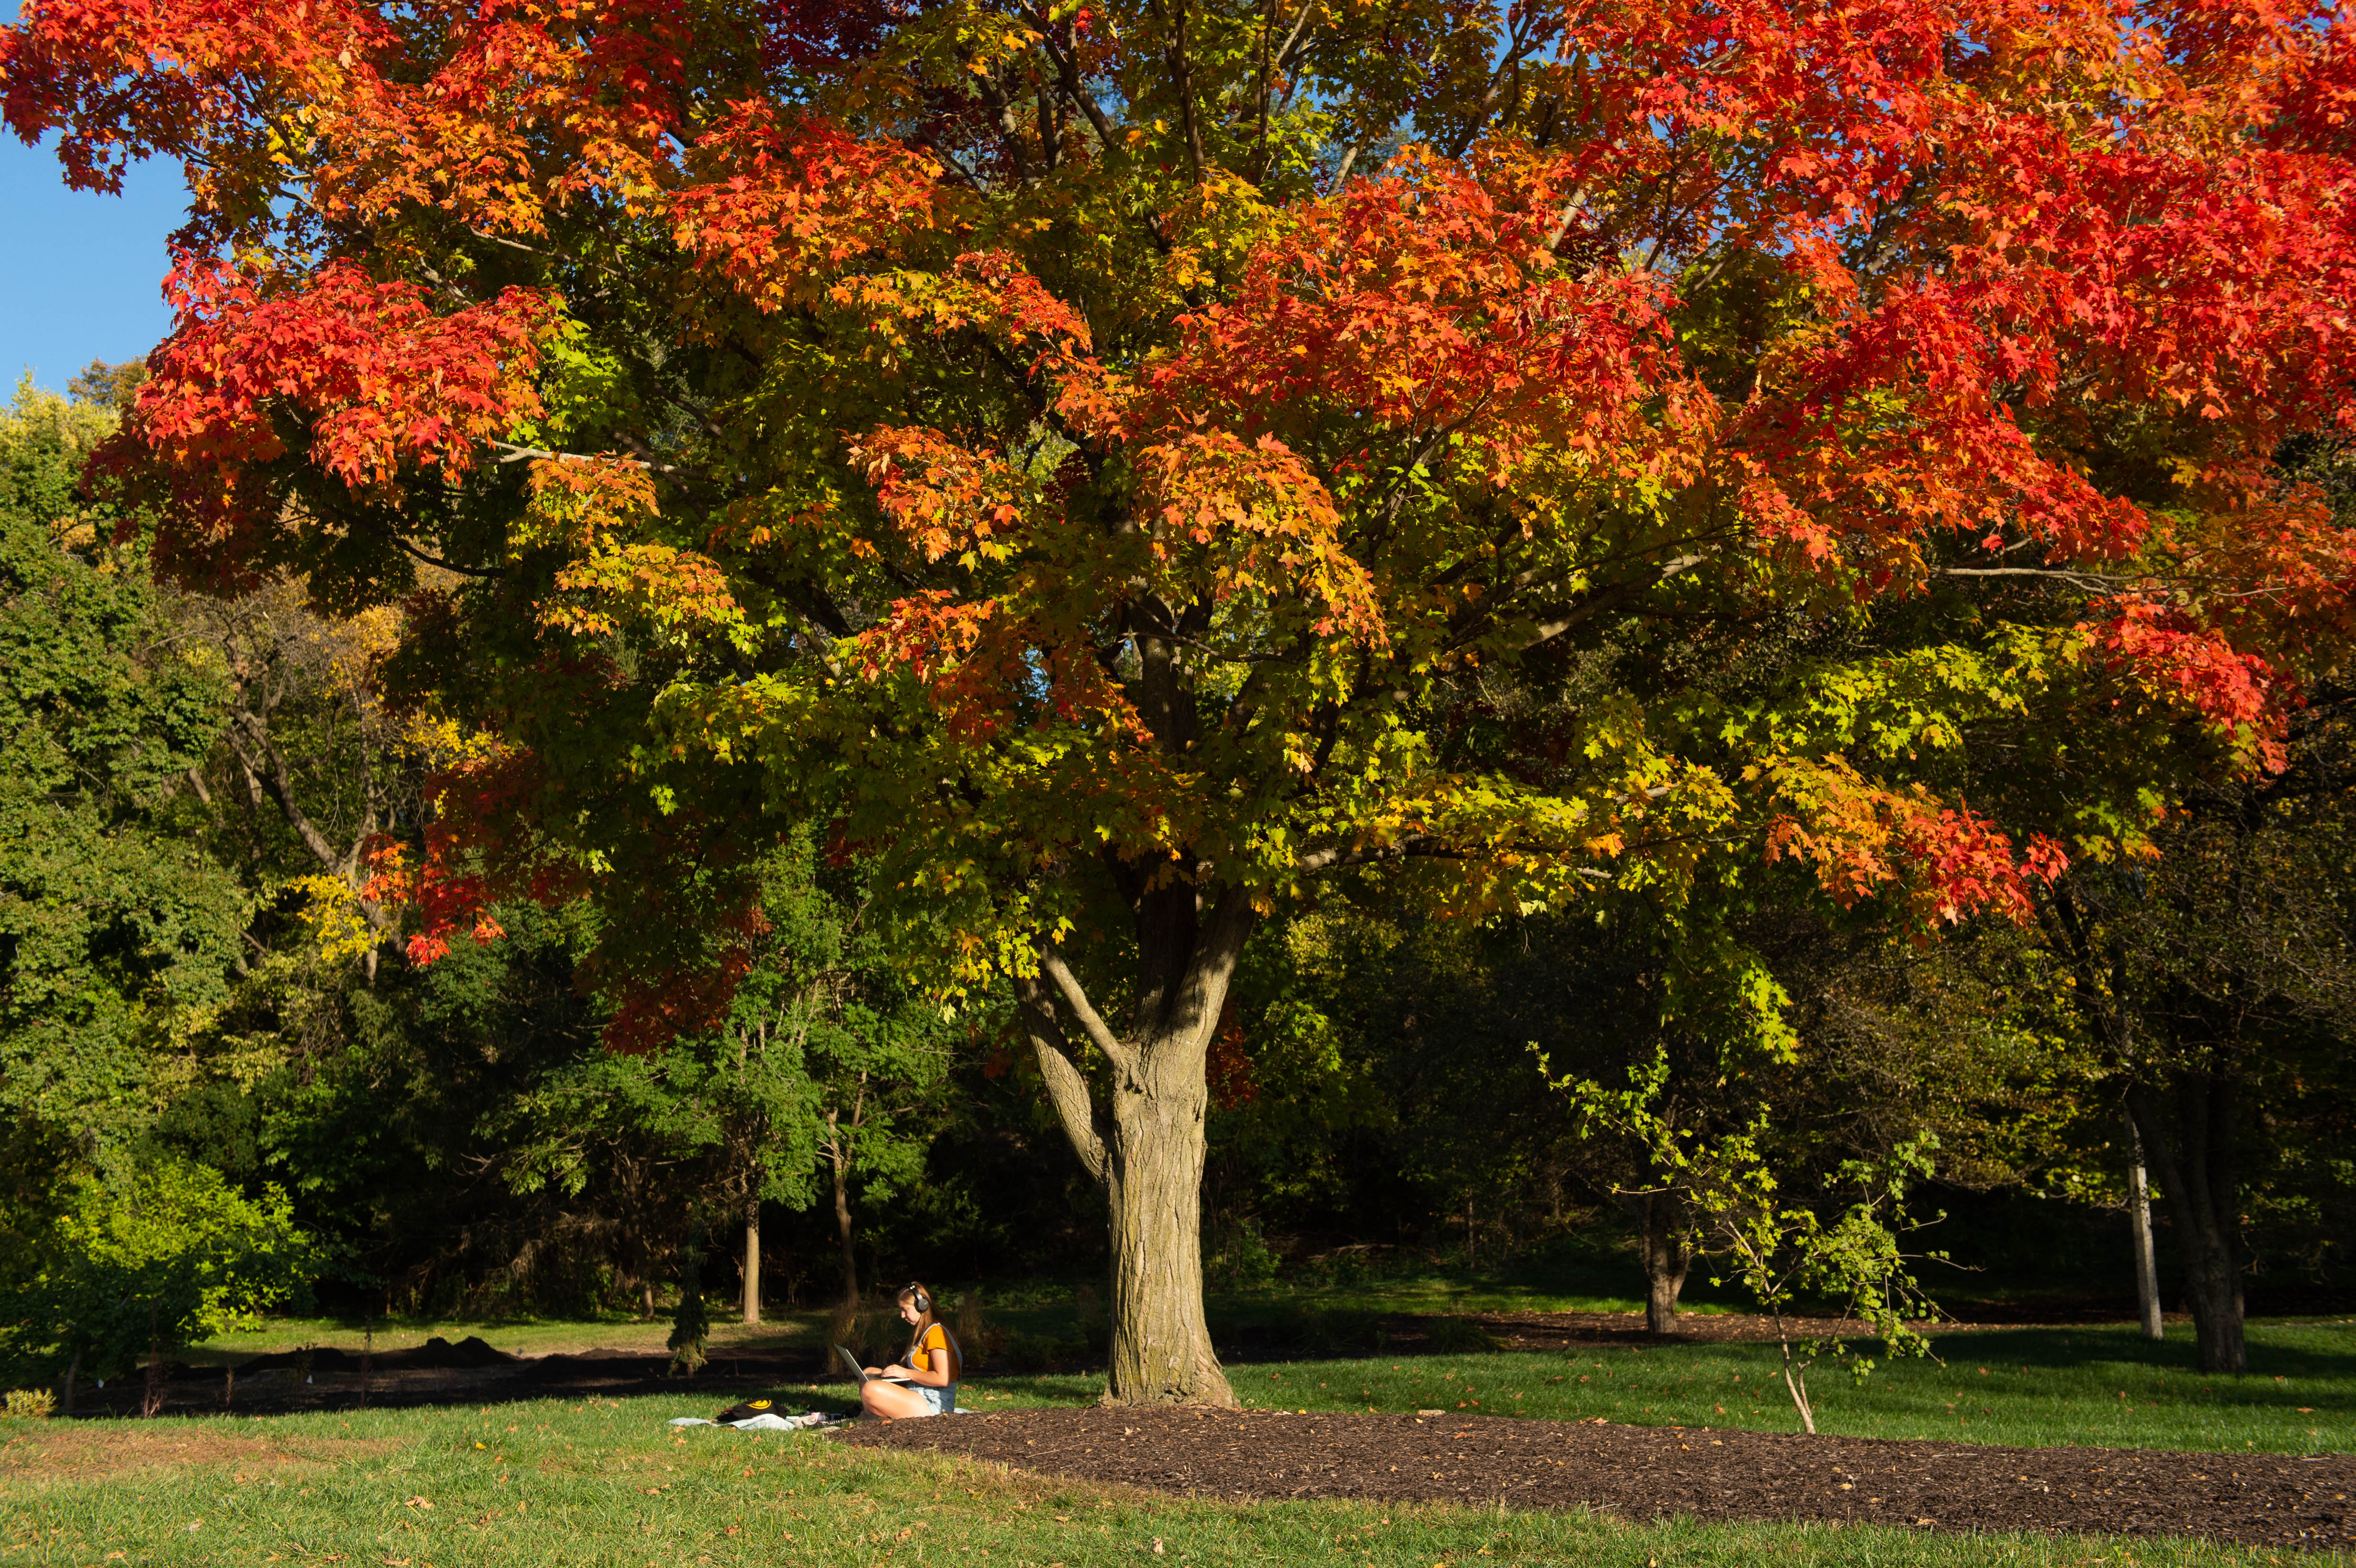 Student under tree with leaves changing color